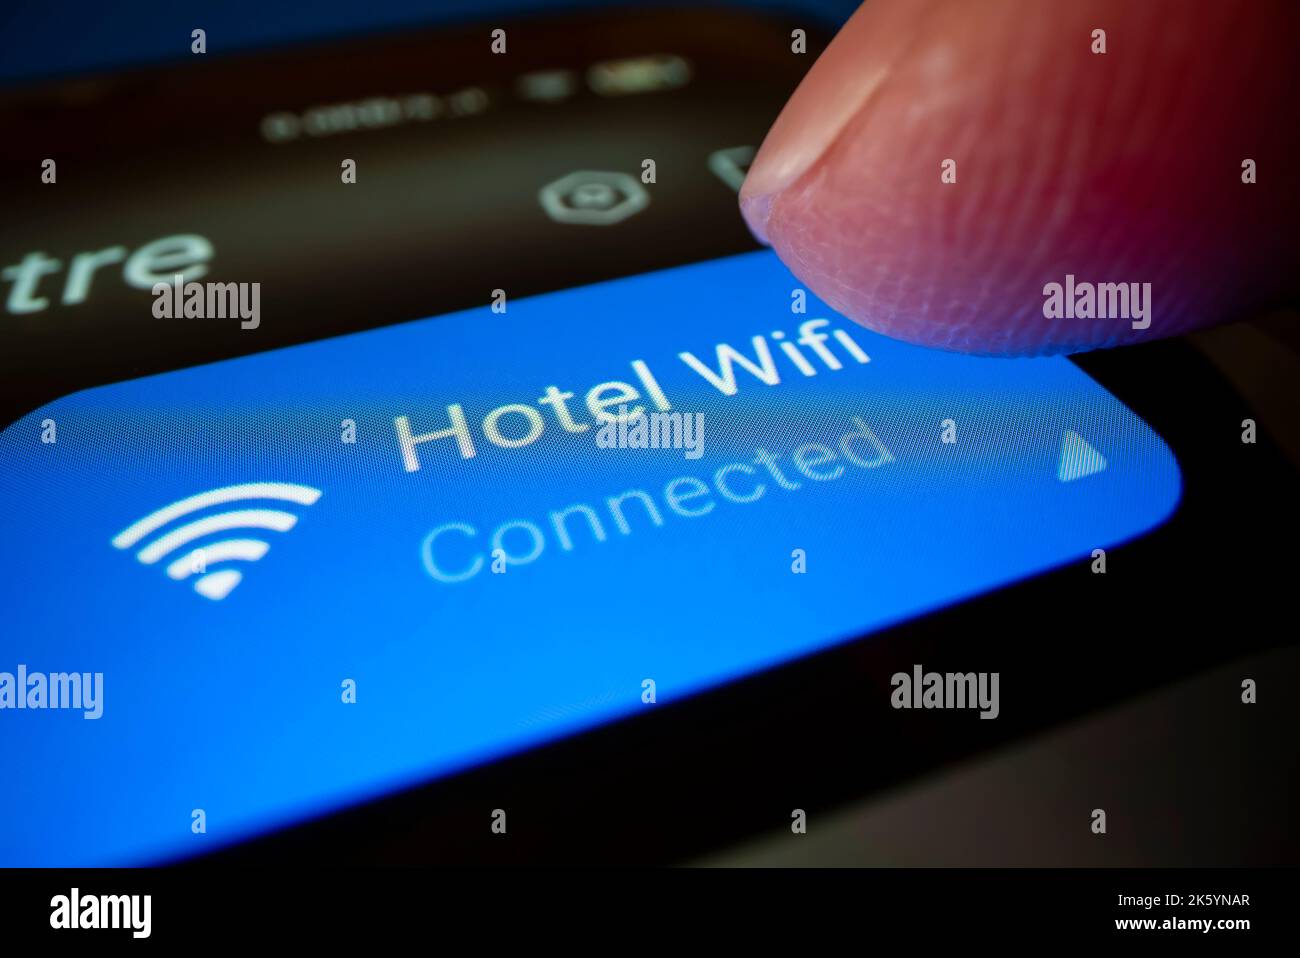 Close-up view of connecting smartphone to hotel wifi, shot with macro probe lens Stock Photo